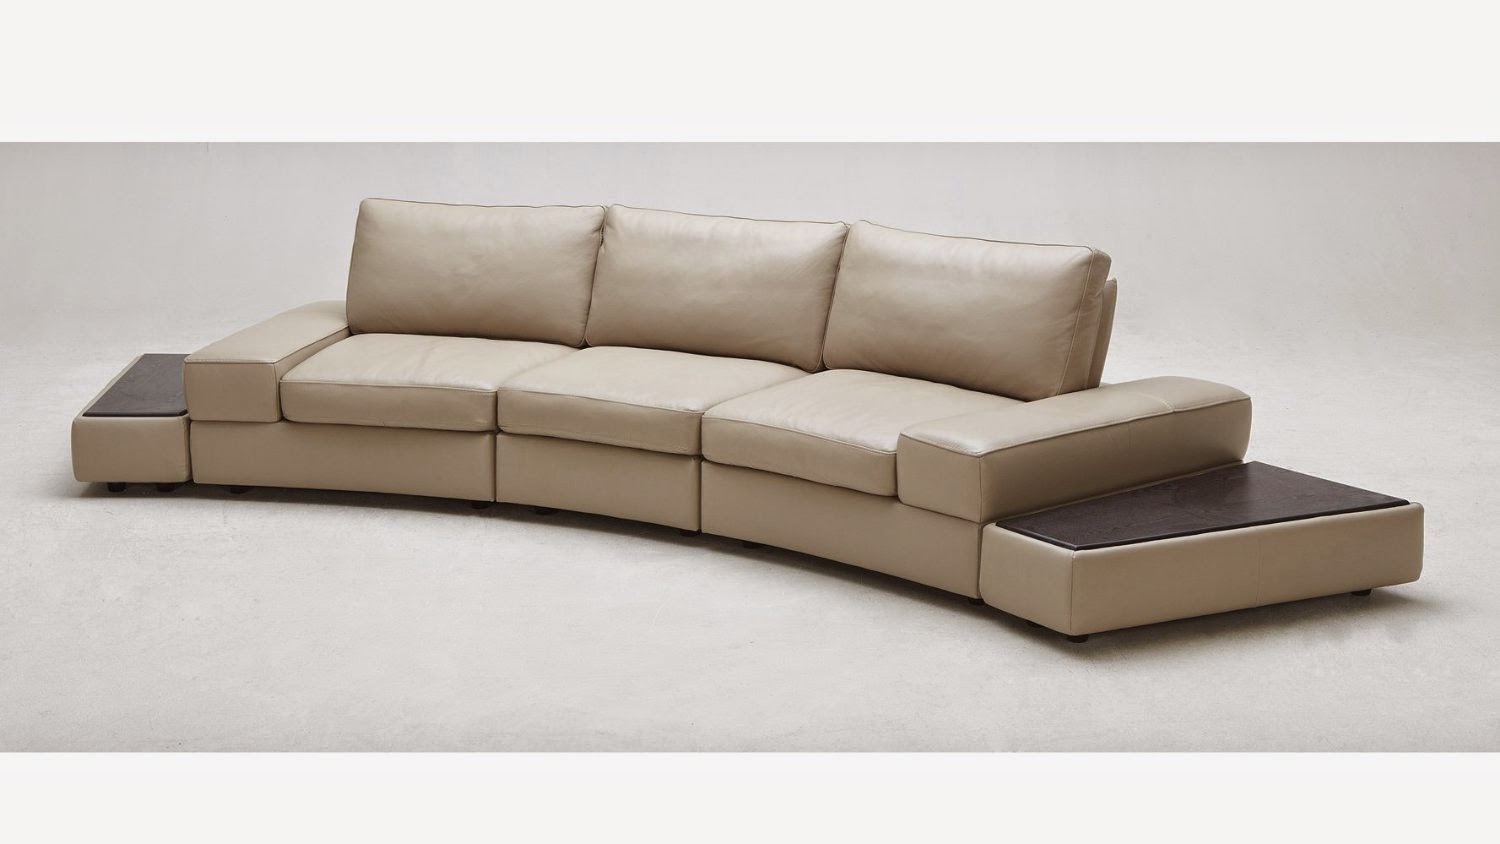 Curved Sofa Website Reviews Mid Century Modern Curved Sectional Sofa